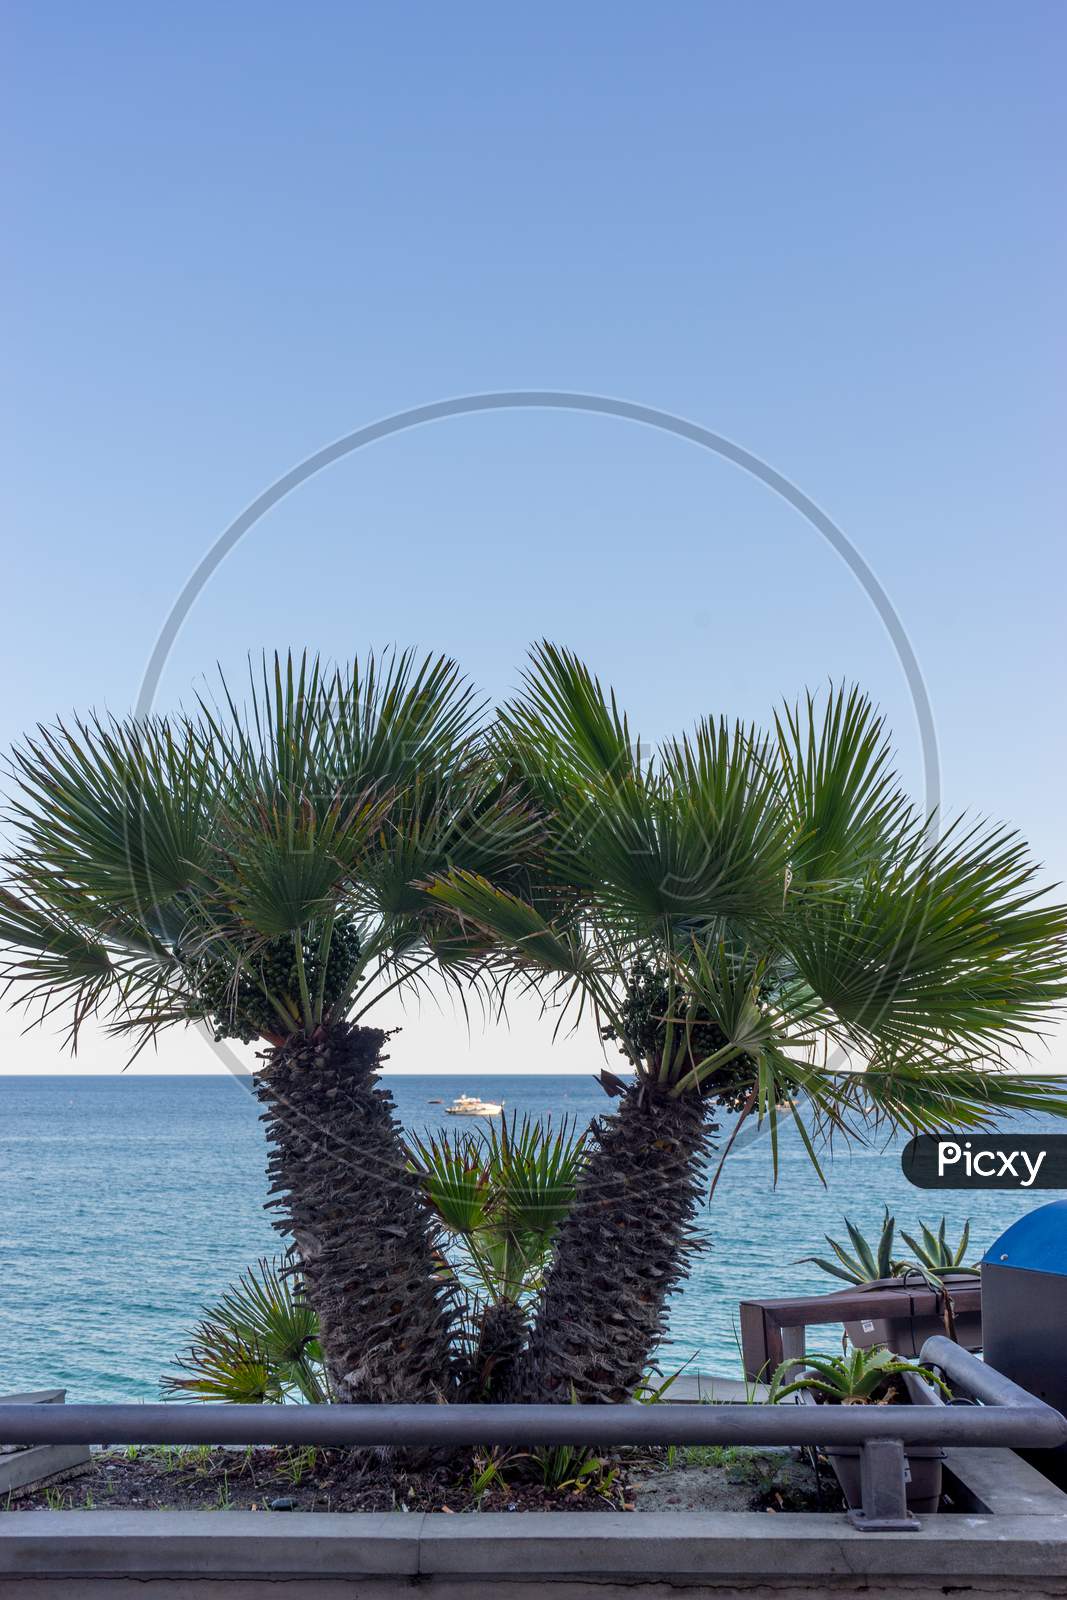 Italy, Cinque Terre, Monterosso, A Palm Tree In Front Of A Fence